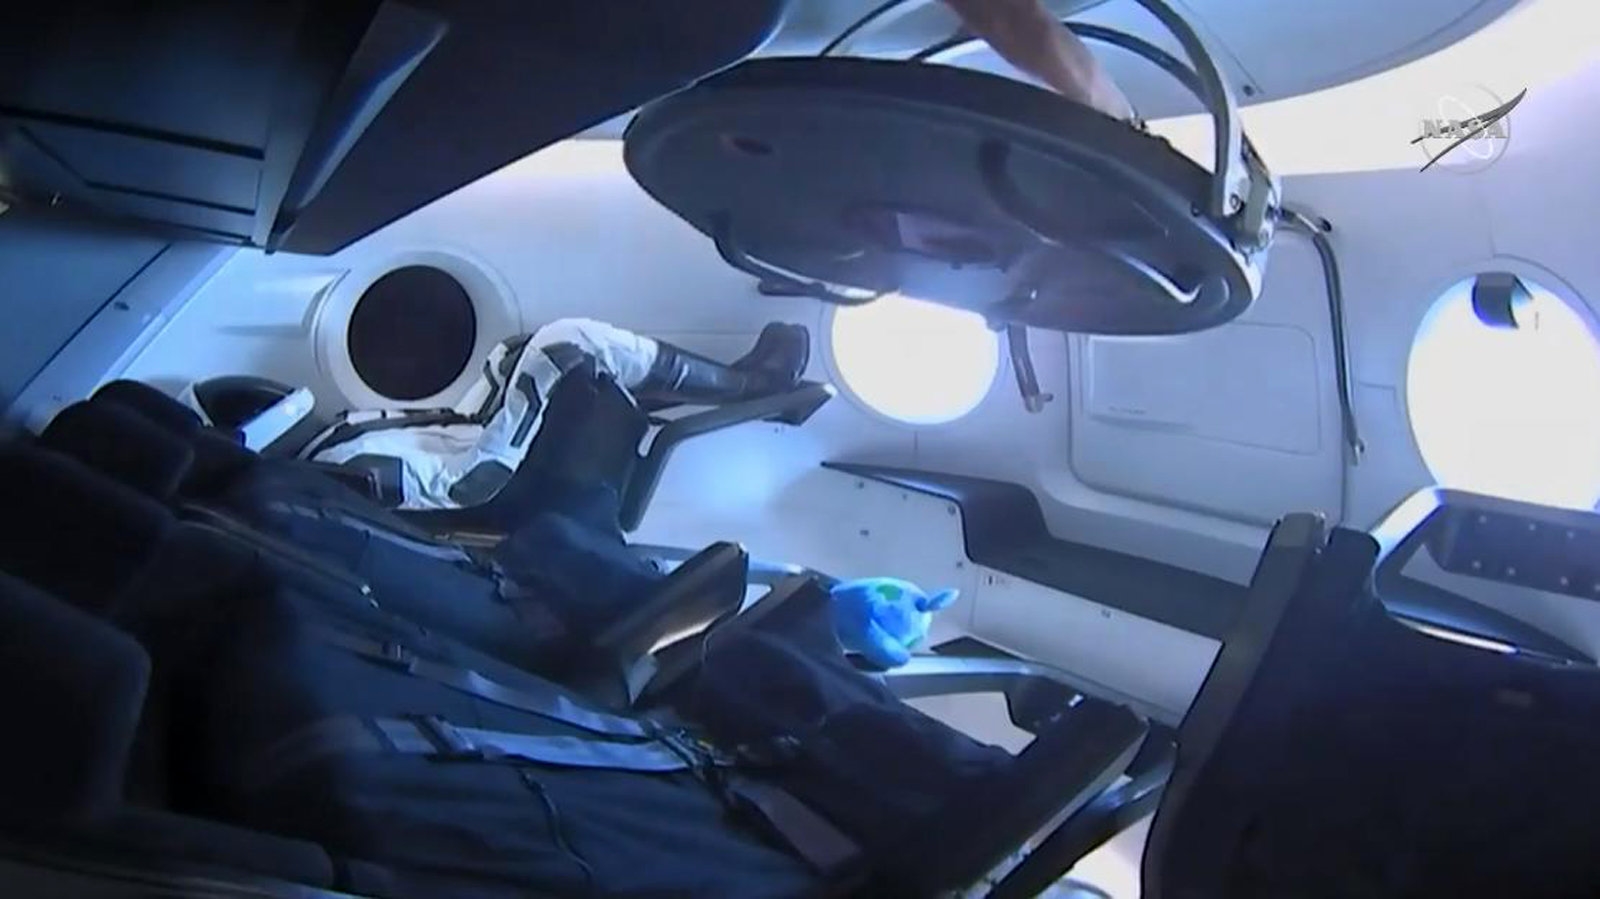 SpaceX Crew Dragon capsule docks with ISS | DeviceDaily.com